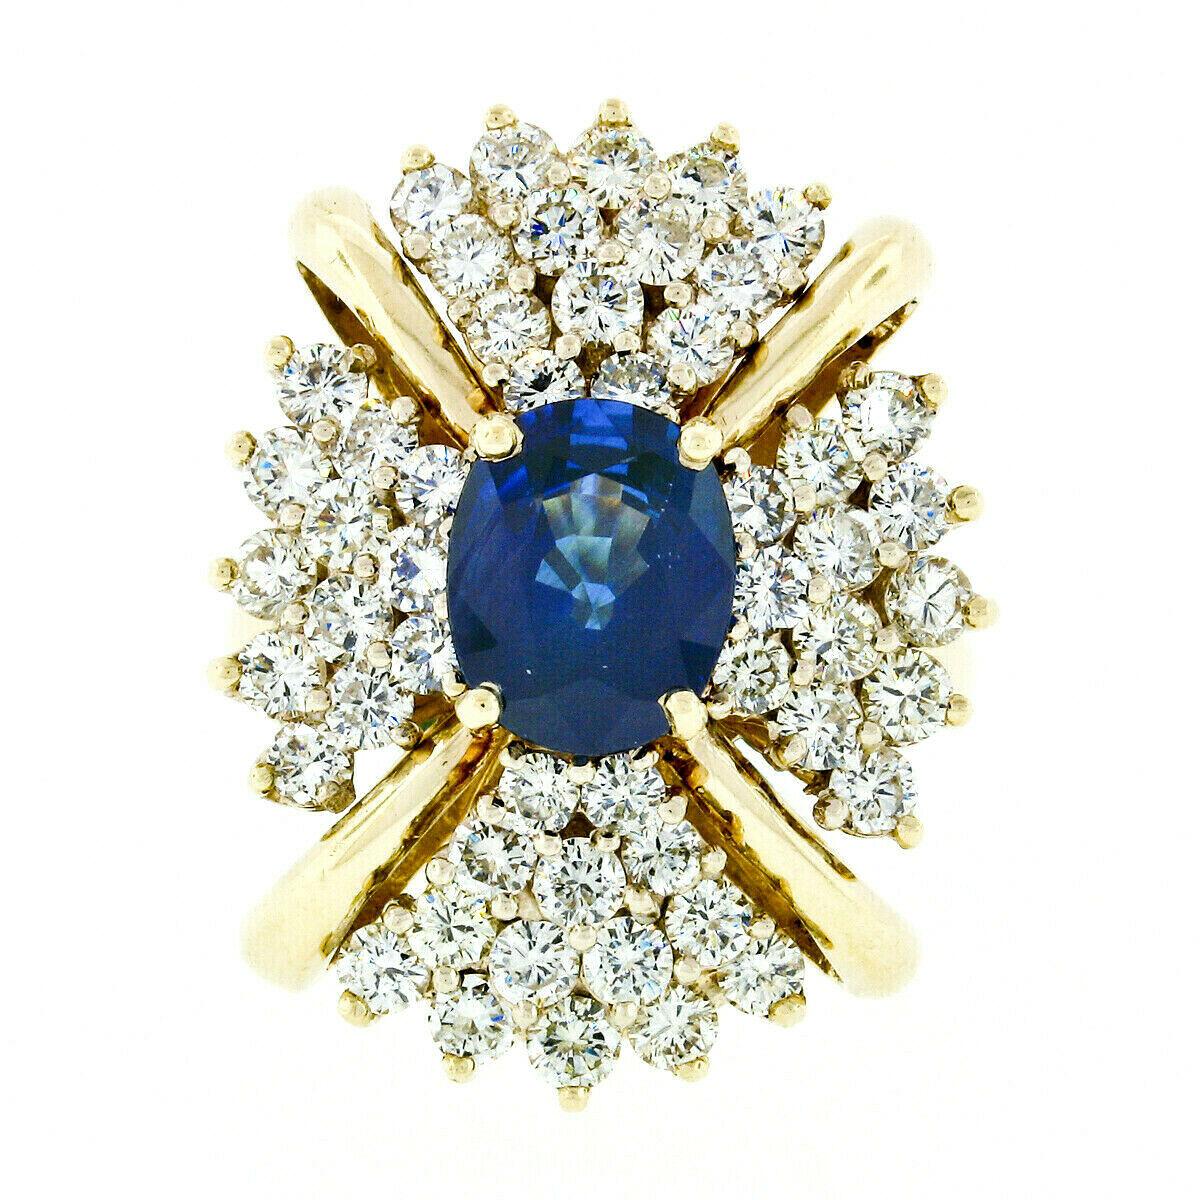 Large Vintage 14k Gold 6.24ctw GIA Oval Ceylon Sapphire & Diamond Cocktail Ring In Good Condition For Sale In Montclair, NJ